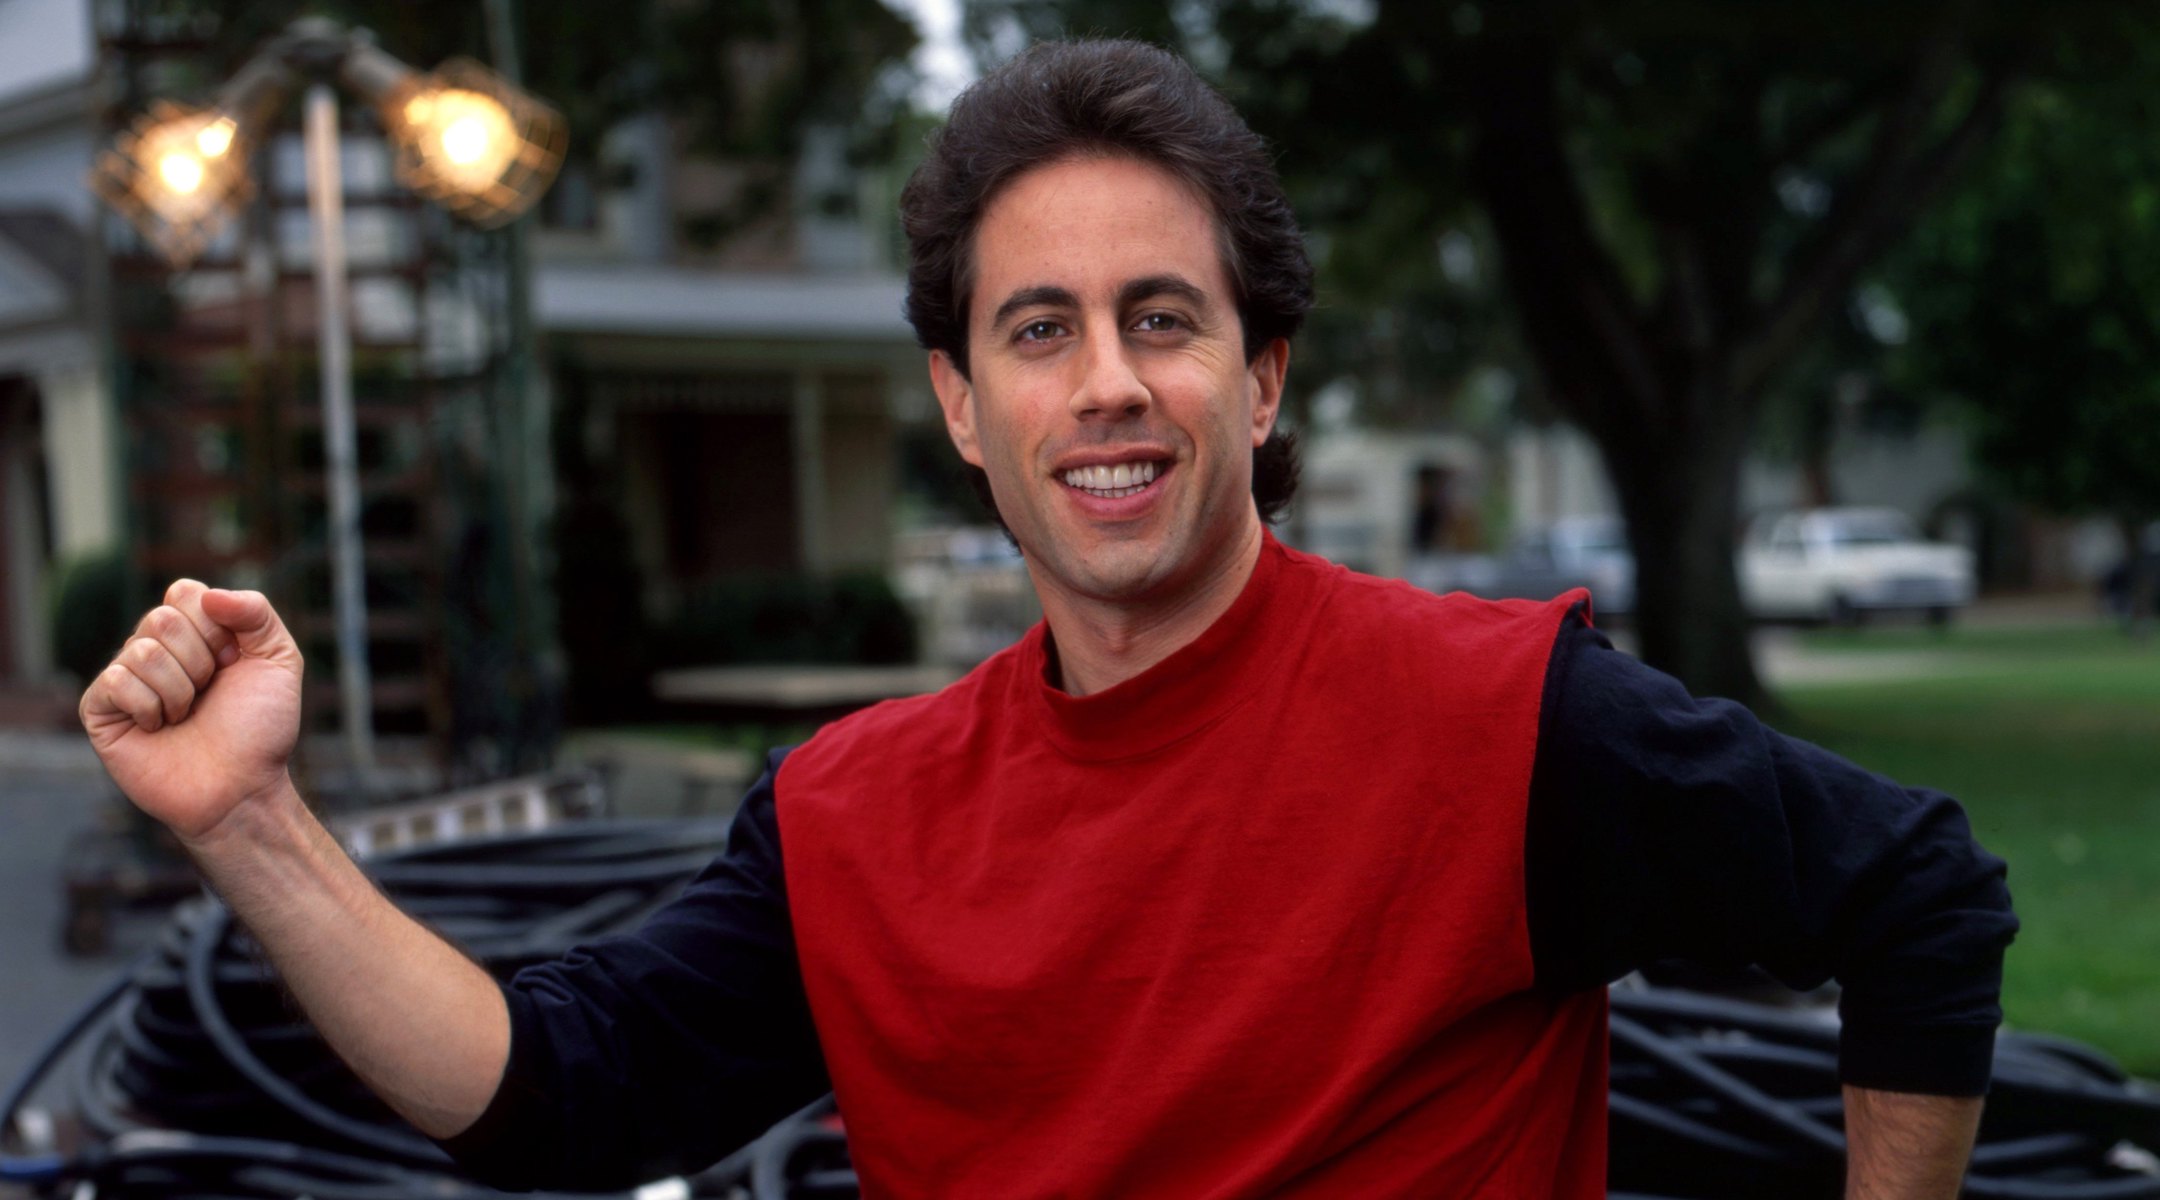 Jerry Seinfeld during "Seinfeld" filming in Los Angeles, Oct. 2, 1990. (Ann Summa/Getty Images)